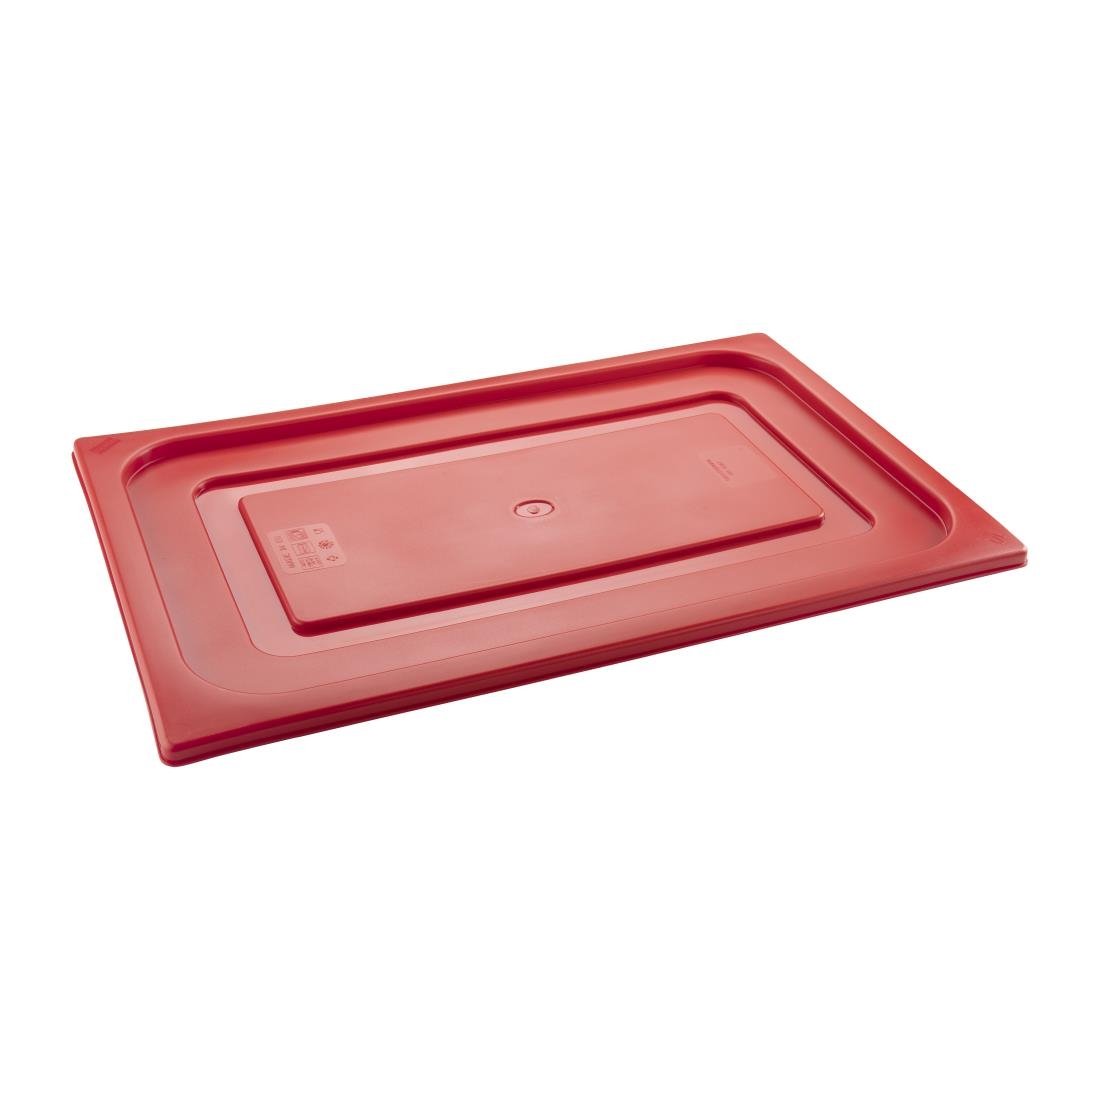 HT891 Pujadas Red Polinorm Gastronorm Lid 1/4GN